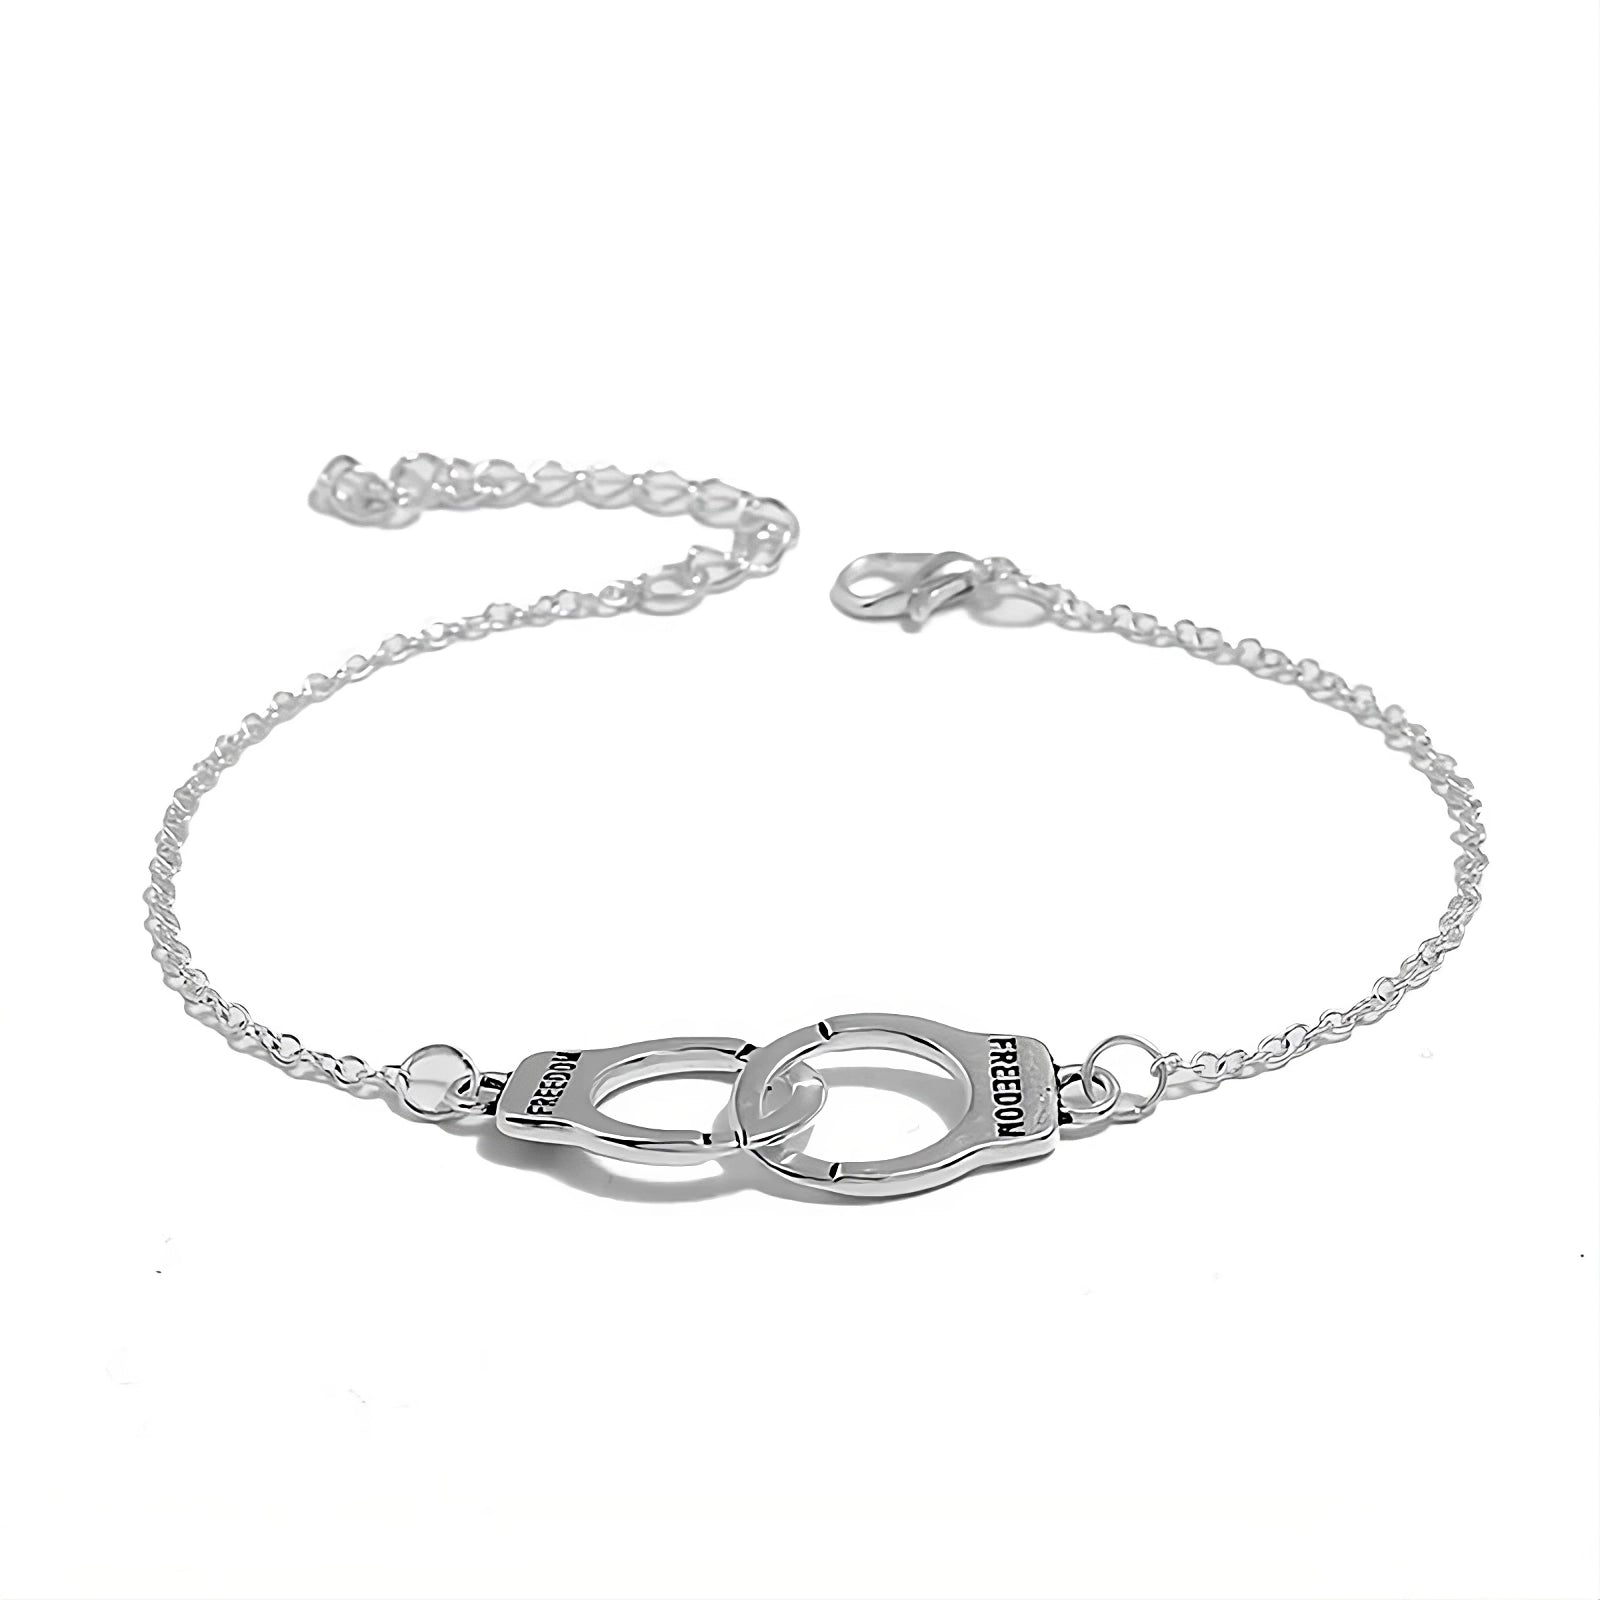 Chained Handcuff Anklets